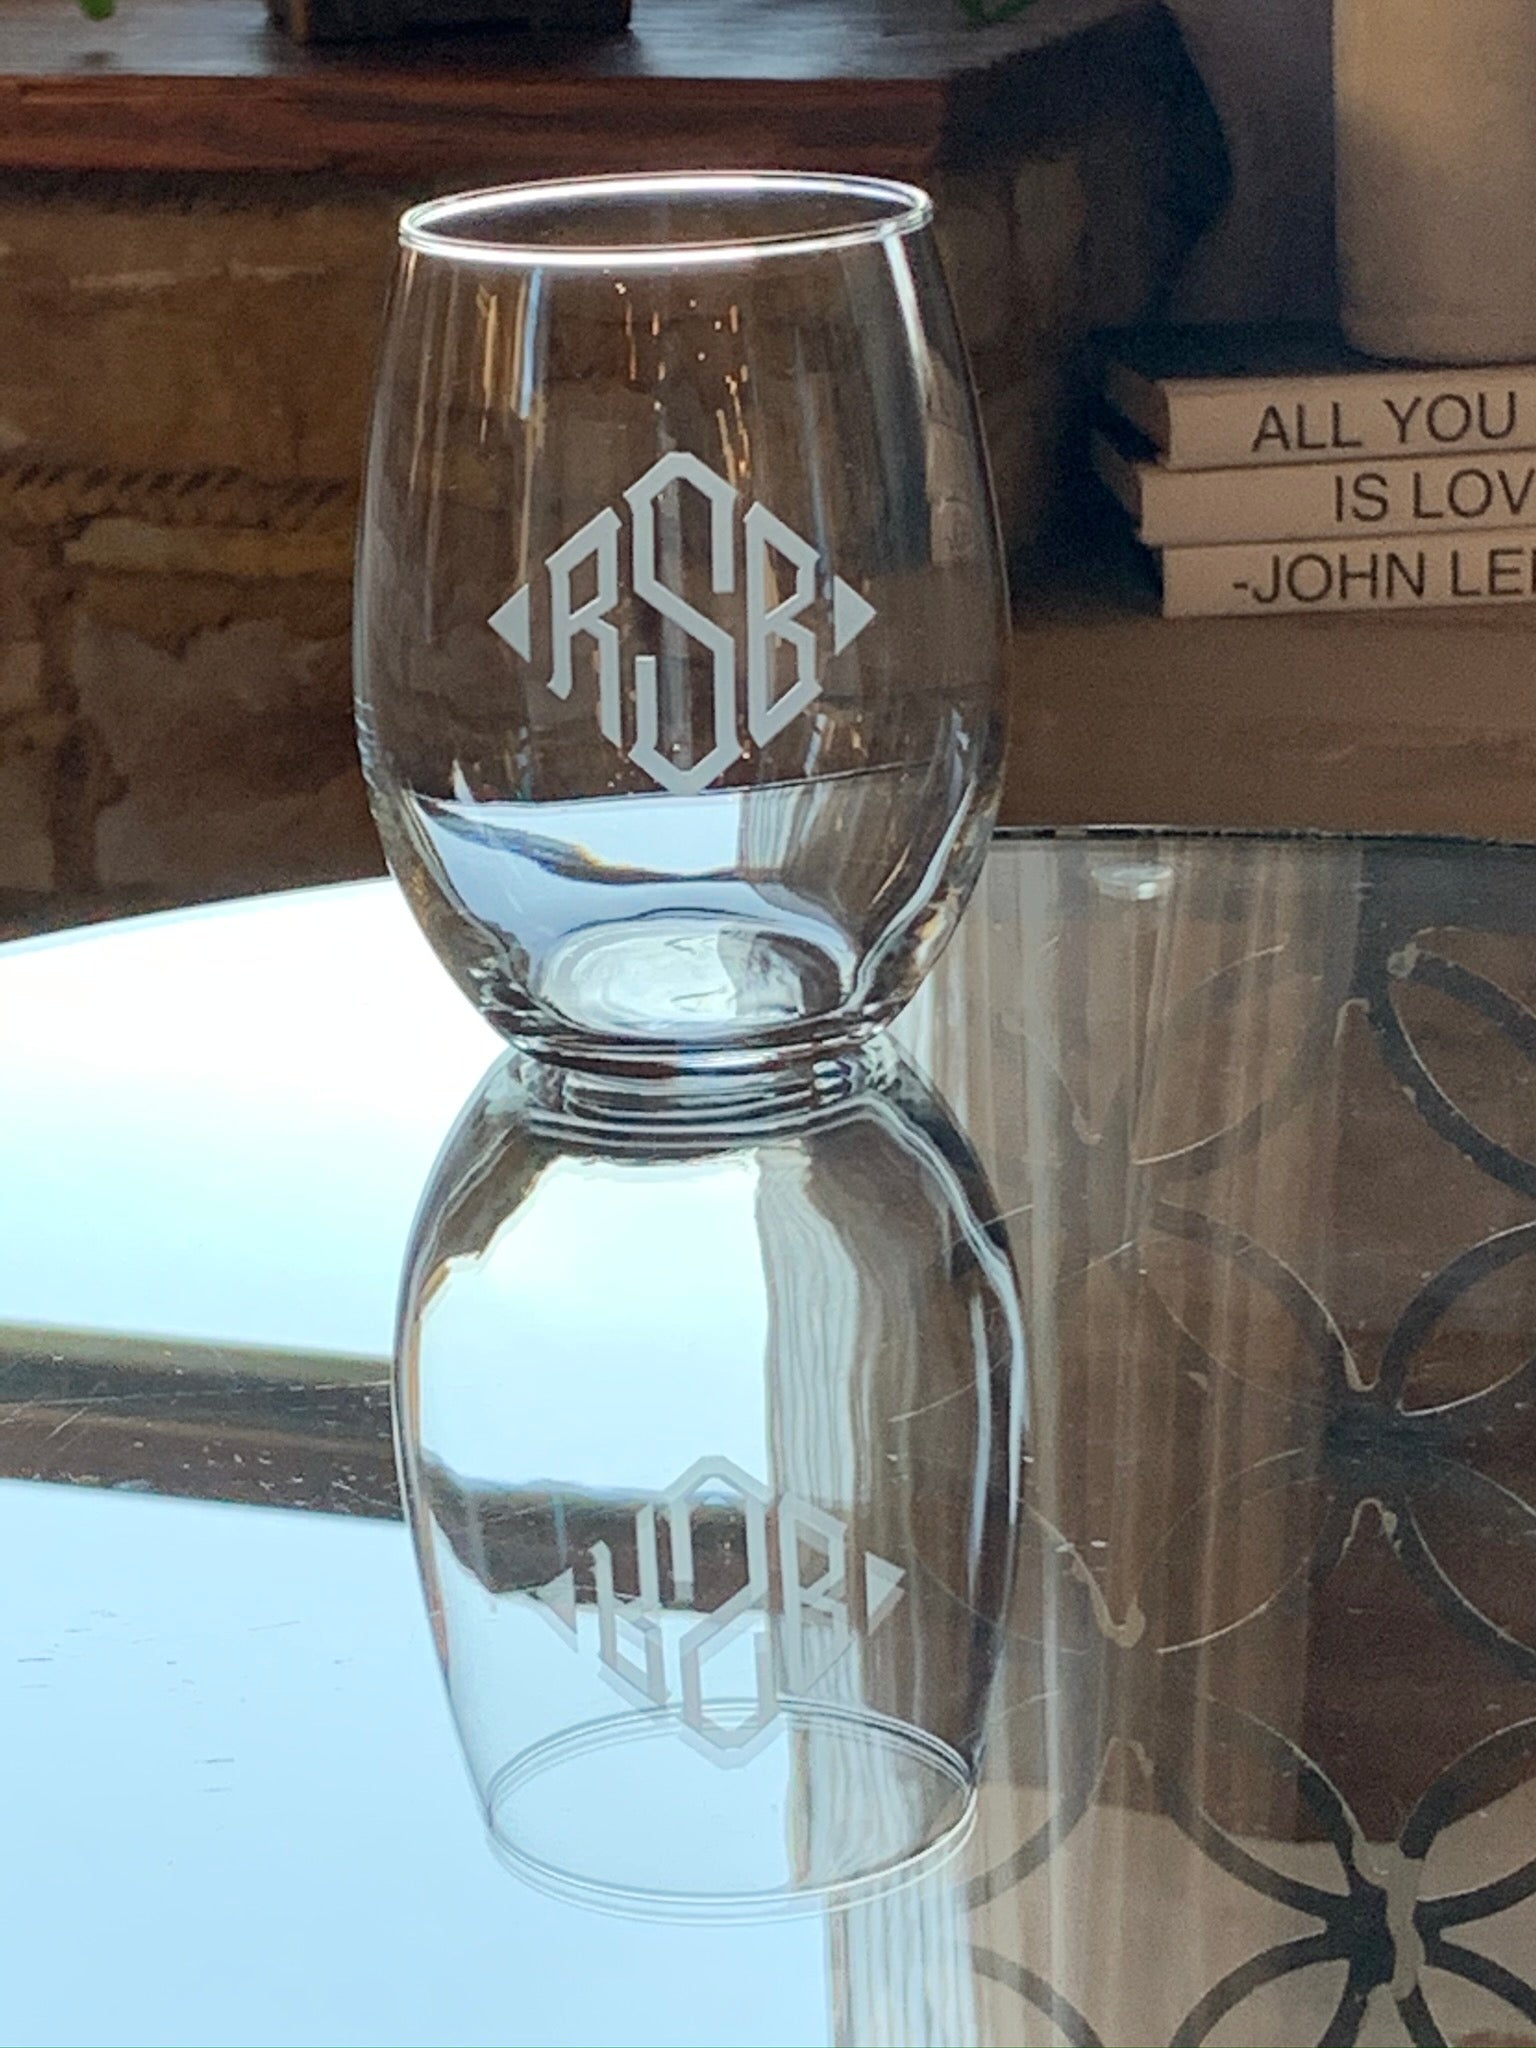 Single Customizable Monogram 15 oz Etched Stemless Wine Glass Engraved  Personalized with Initial and Name